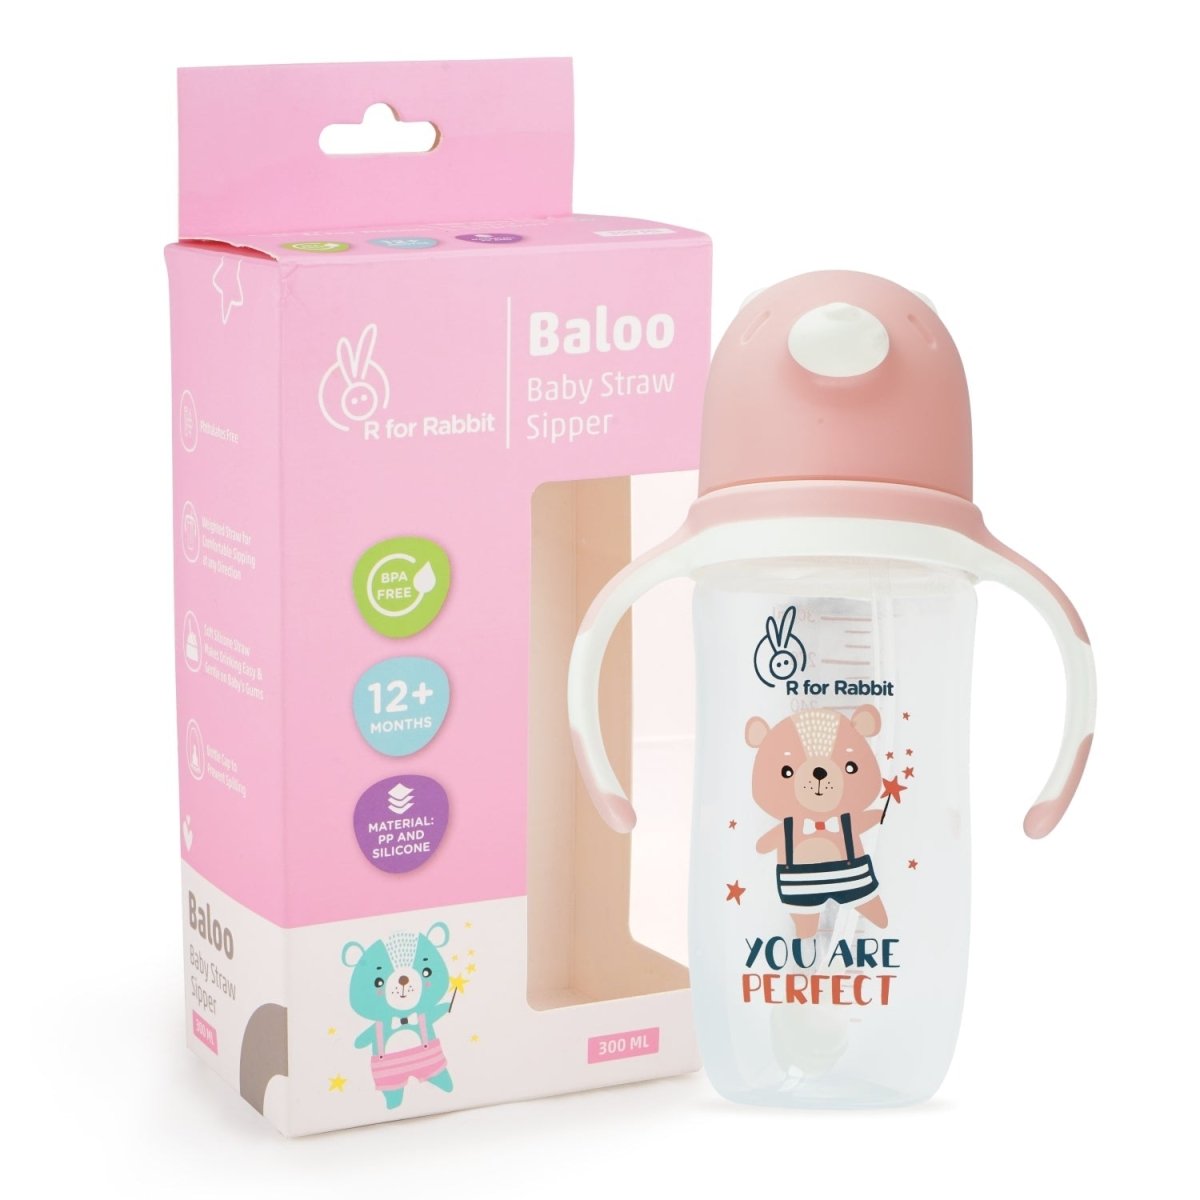 R for Rabbit Baloo Baby Straw Sipper- Pink - SIHPP01